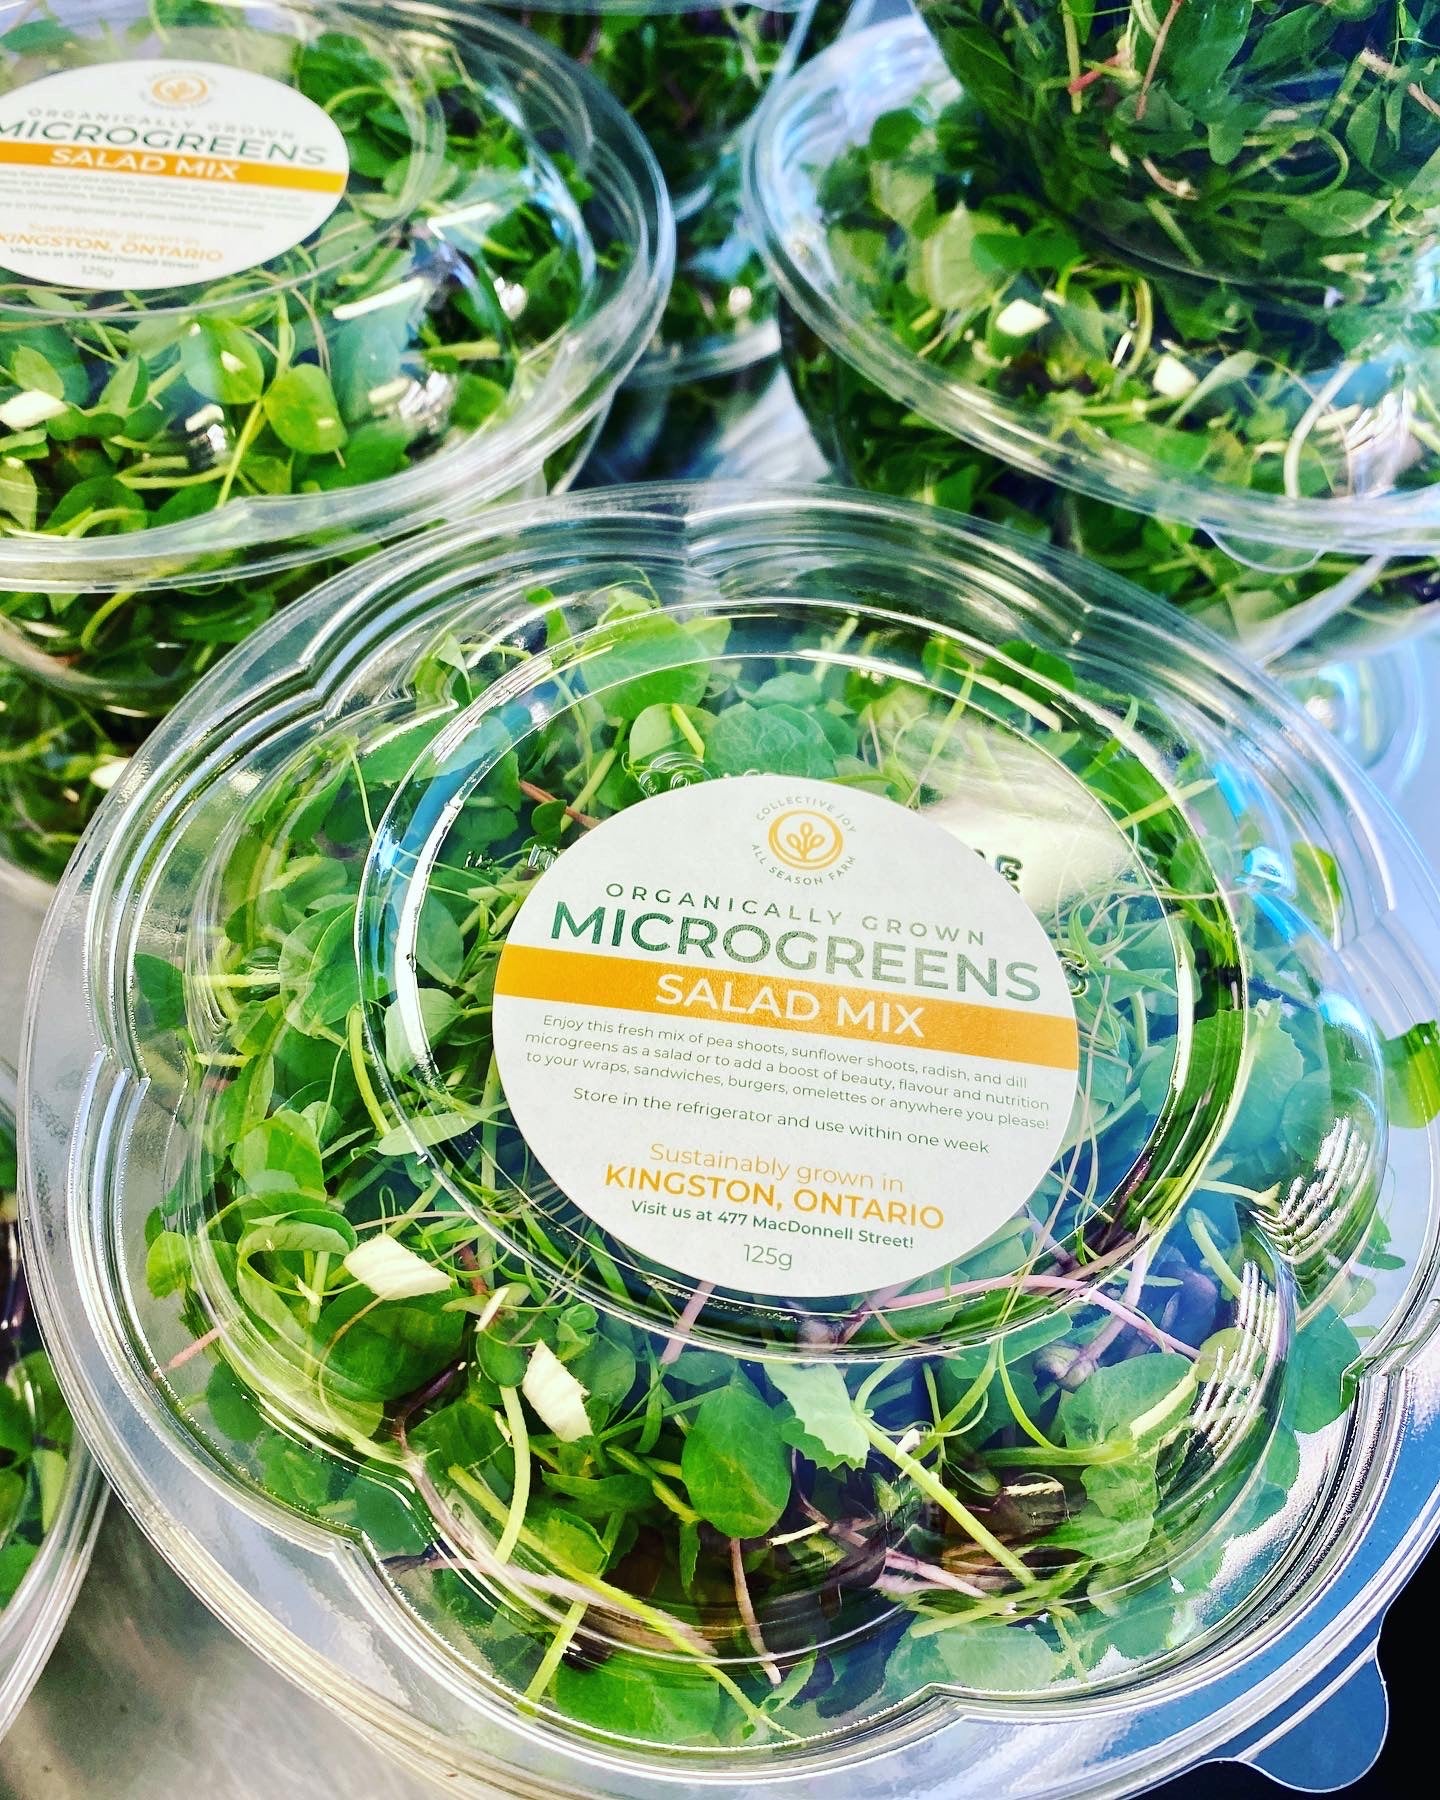 The Microgreens First Timer!